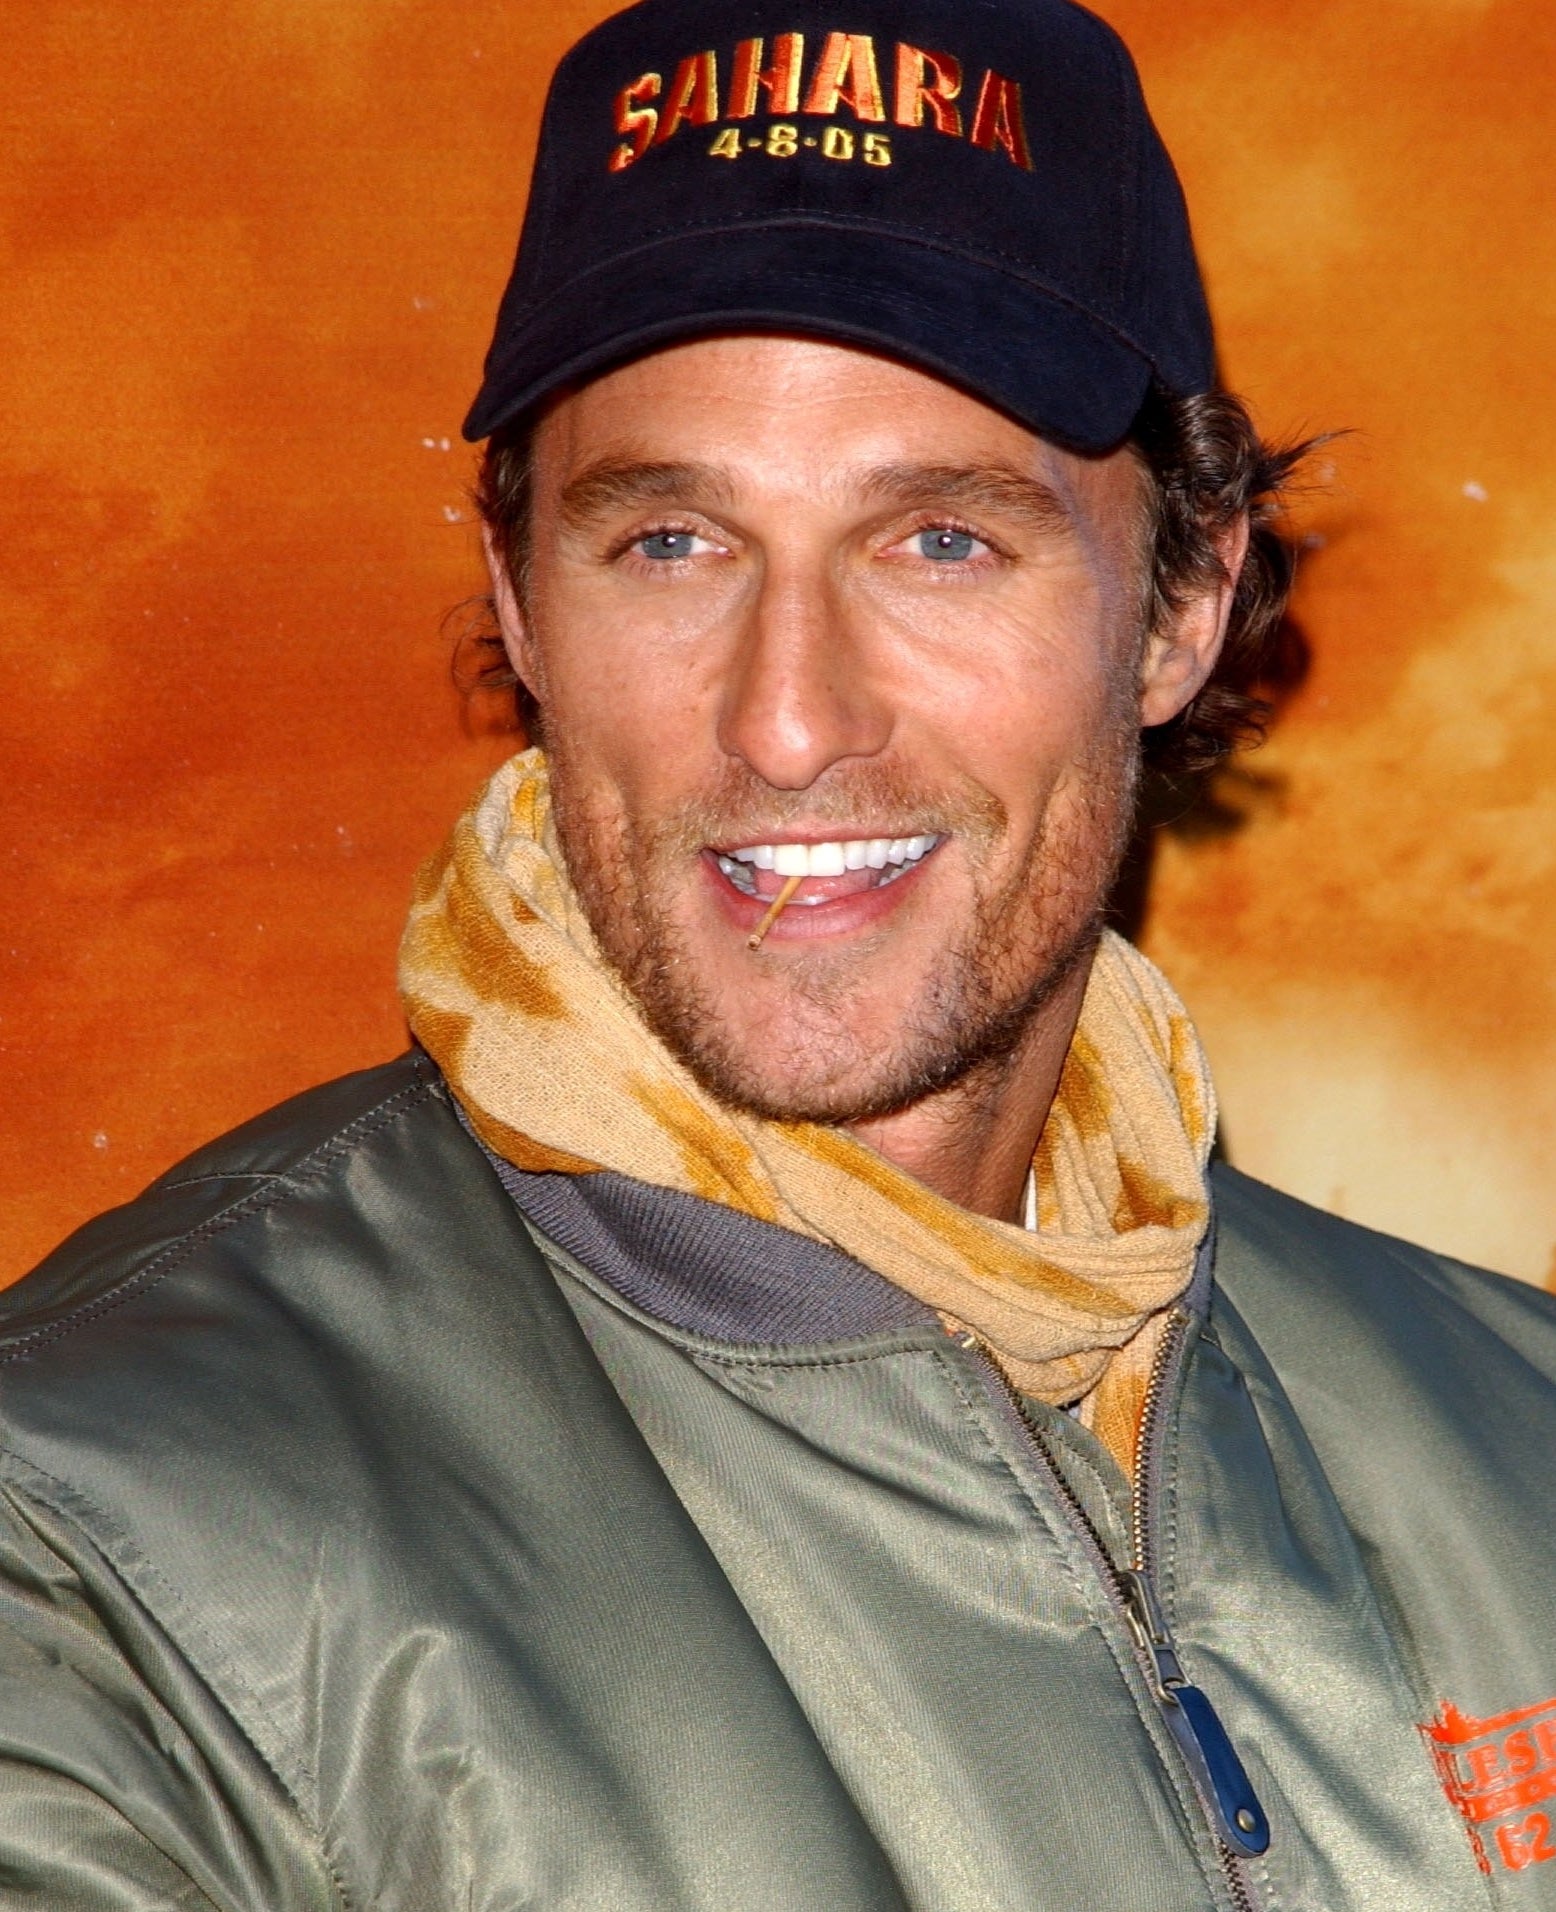 Matthew McConaughey promoting &quot;Sahara&quot; at an event